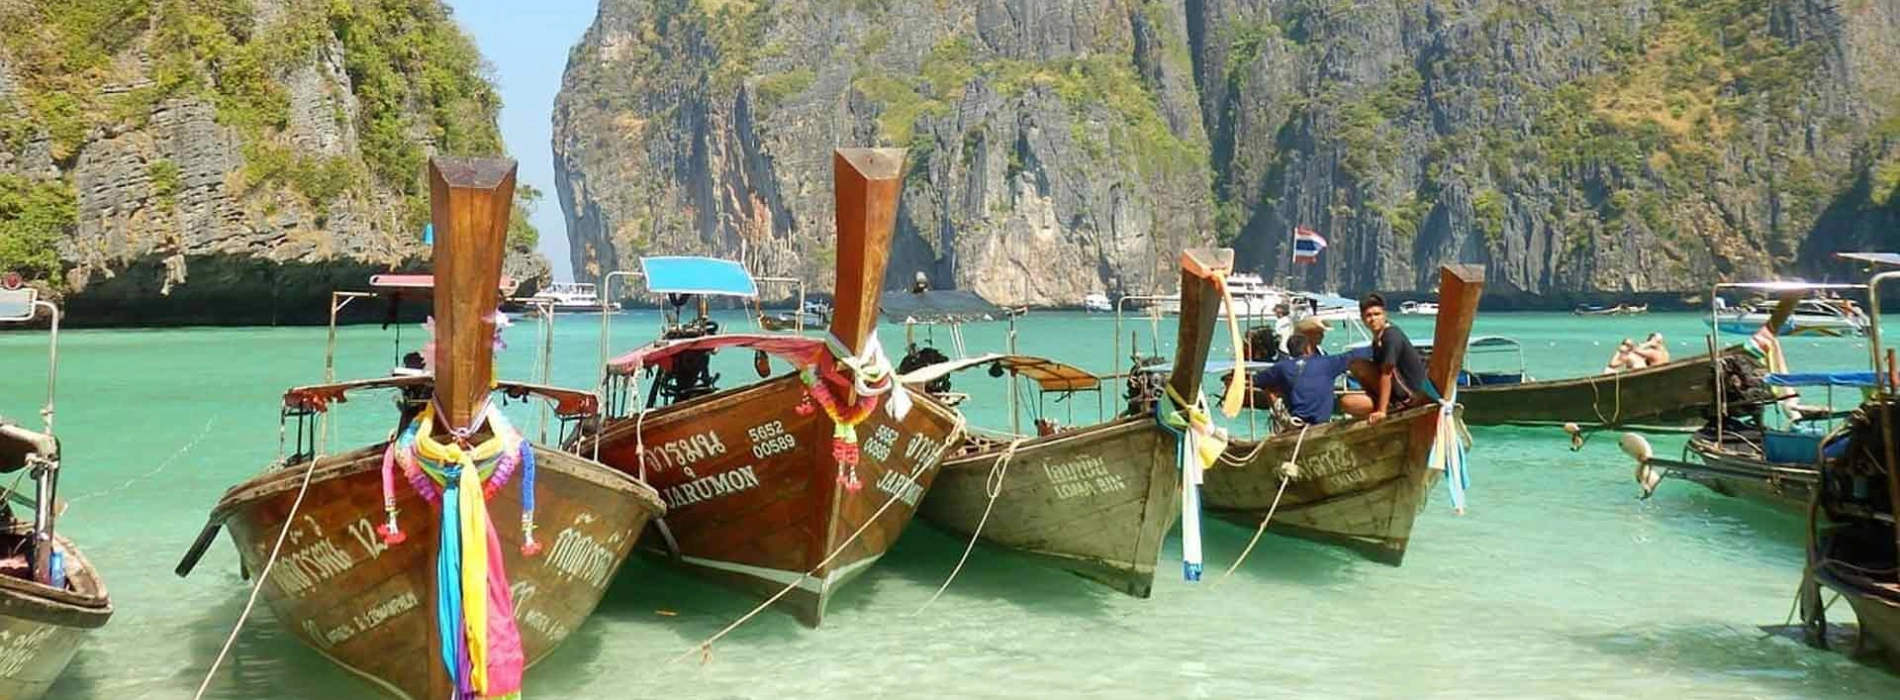 How to get to Koh Phi Phi from Krabi?